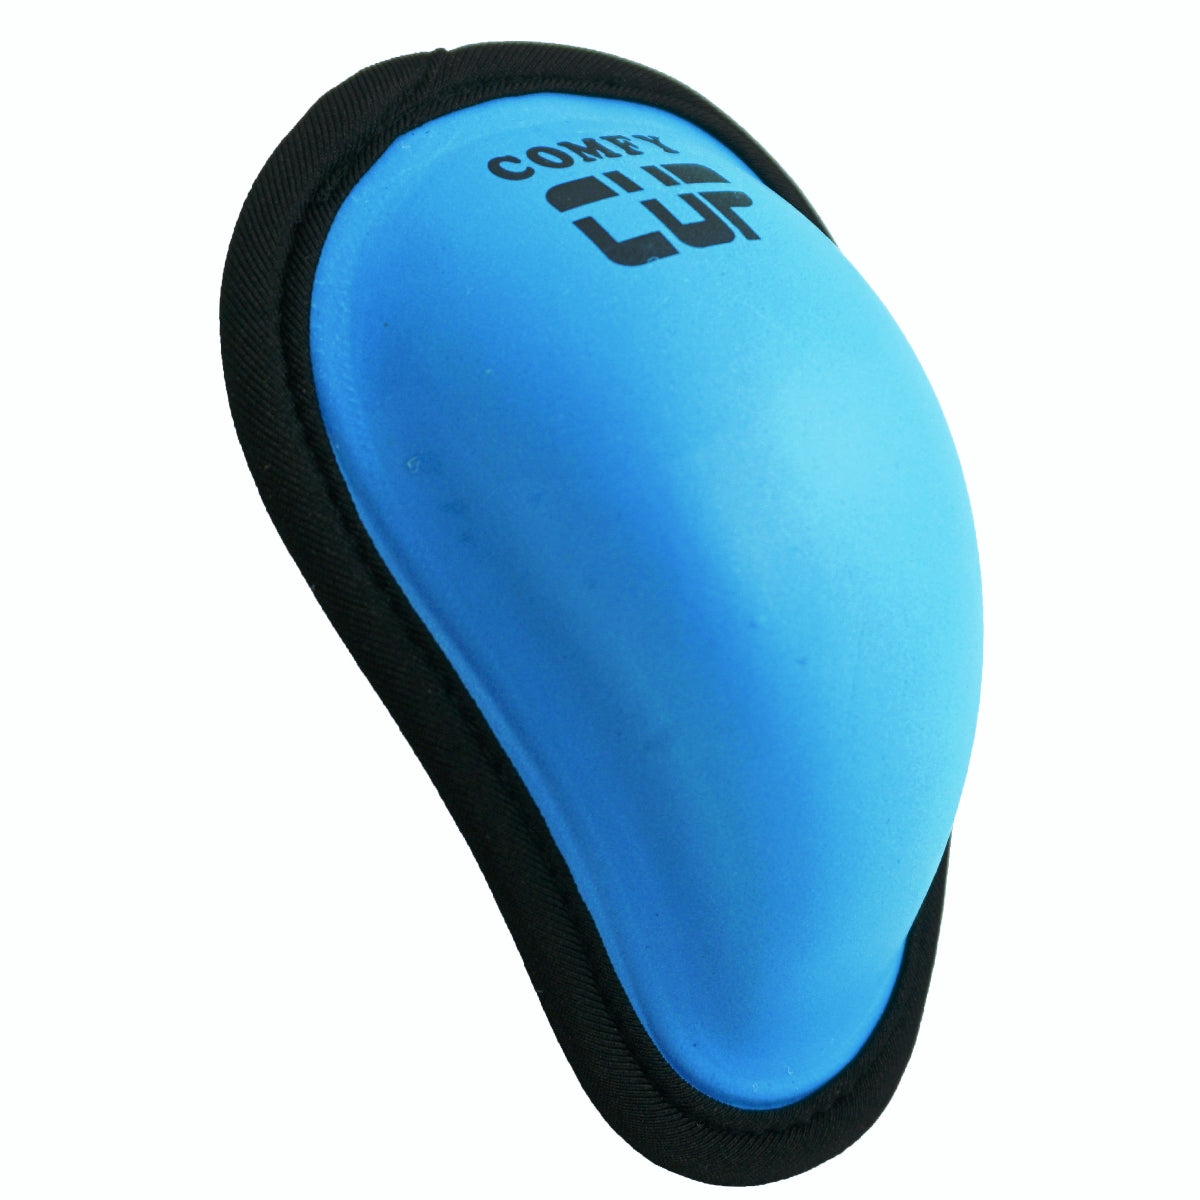 COMFY CUP HAS A LOWER PROFILE THAN TRADITIONAL CUPS.  MADE FROM FLEXIBLE, BREATHABLE MOLDED FOAM THAT CONTOURS TO THE BODY, AND IS SIZED TO FIT LITTLE ATHLETES JUST STARTING OUT WITH CONTACT SPORTS LIKE BASEBALL, HOCKEY, LACROSSE, FOOTBALL, RUGBY, MARTIAL ARTS, SOCCER, TAE KWON DO, KARATE, SPARRING 